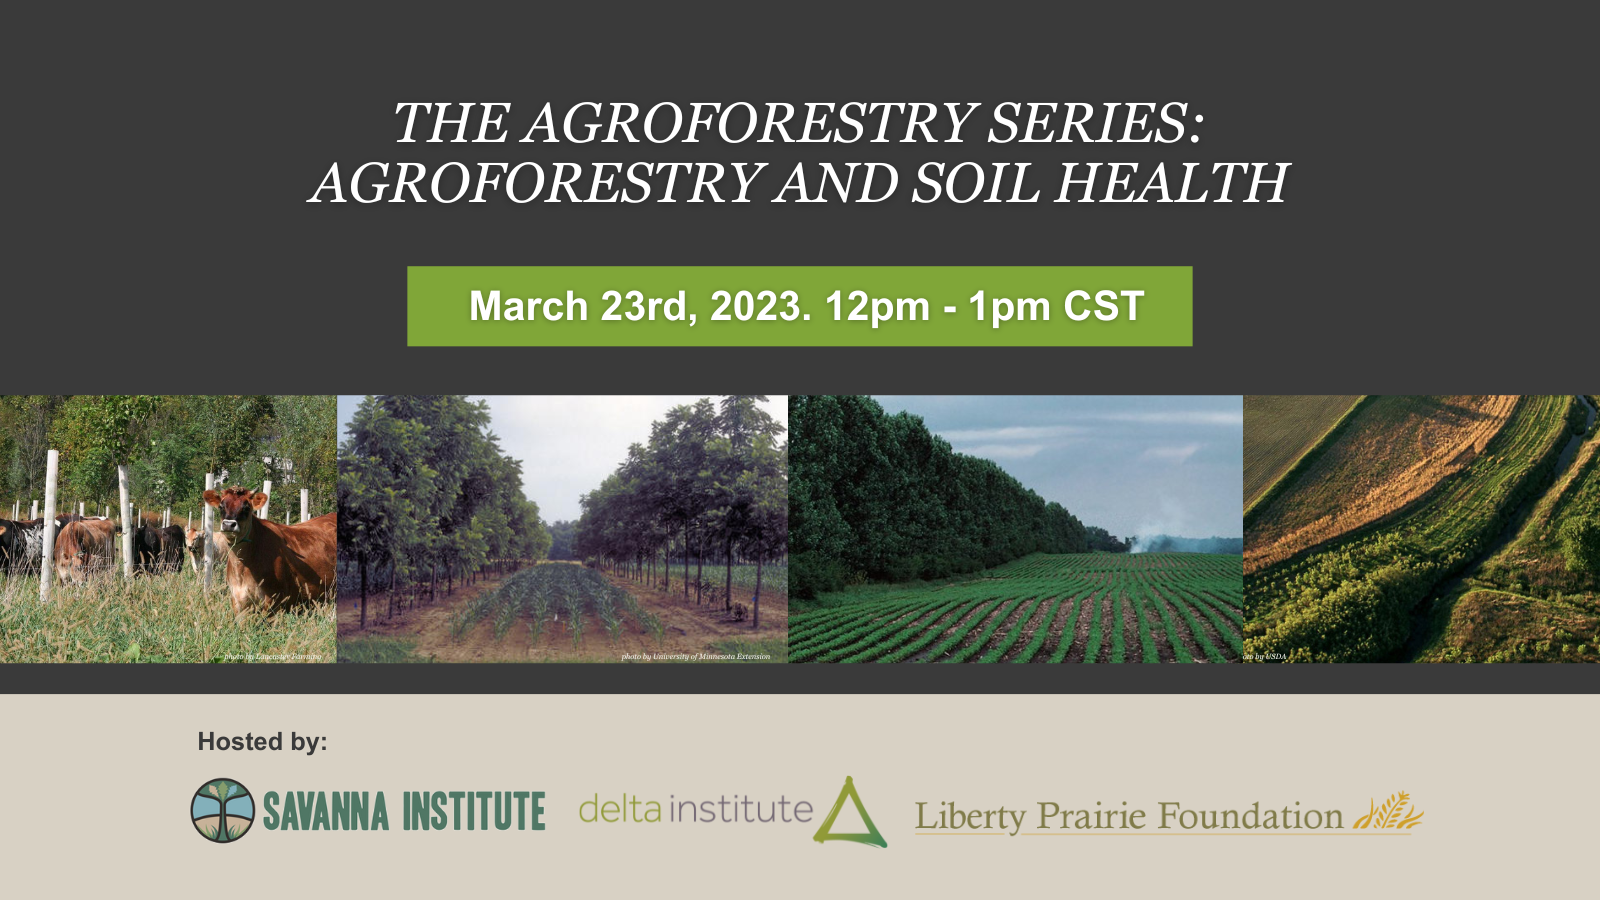 The Agroforestry Series: Agroforestry and Soil Health